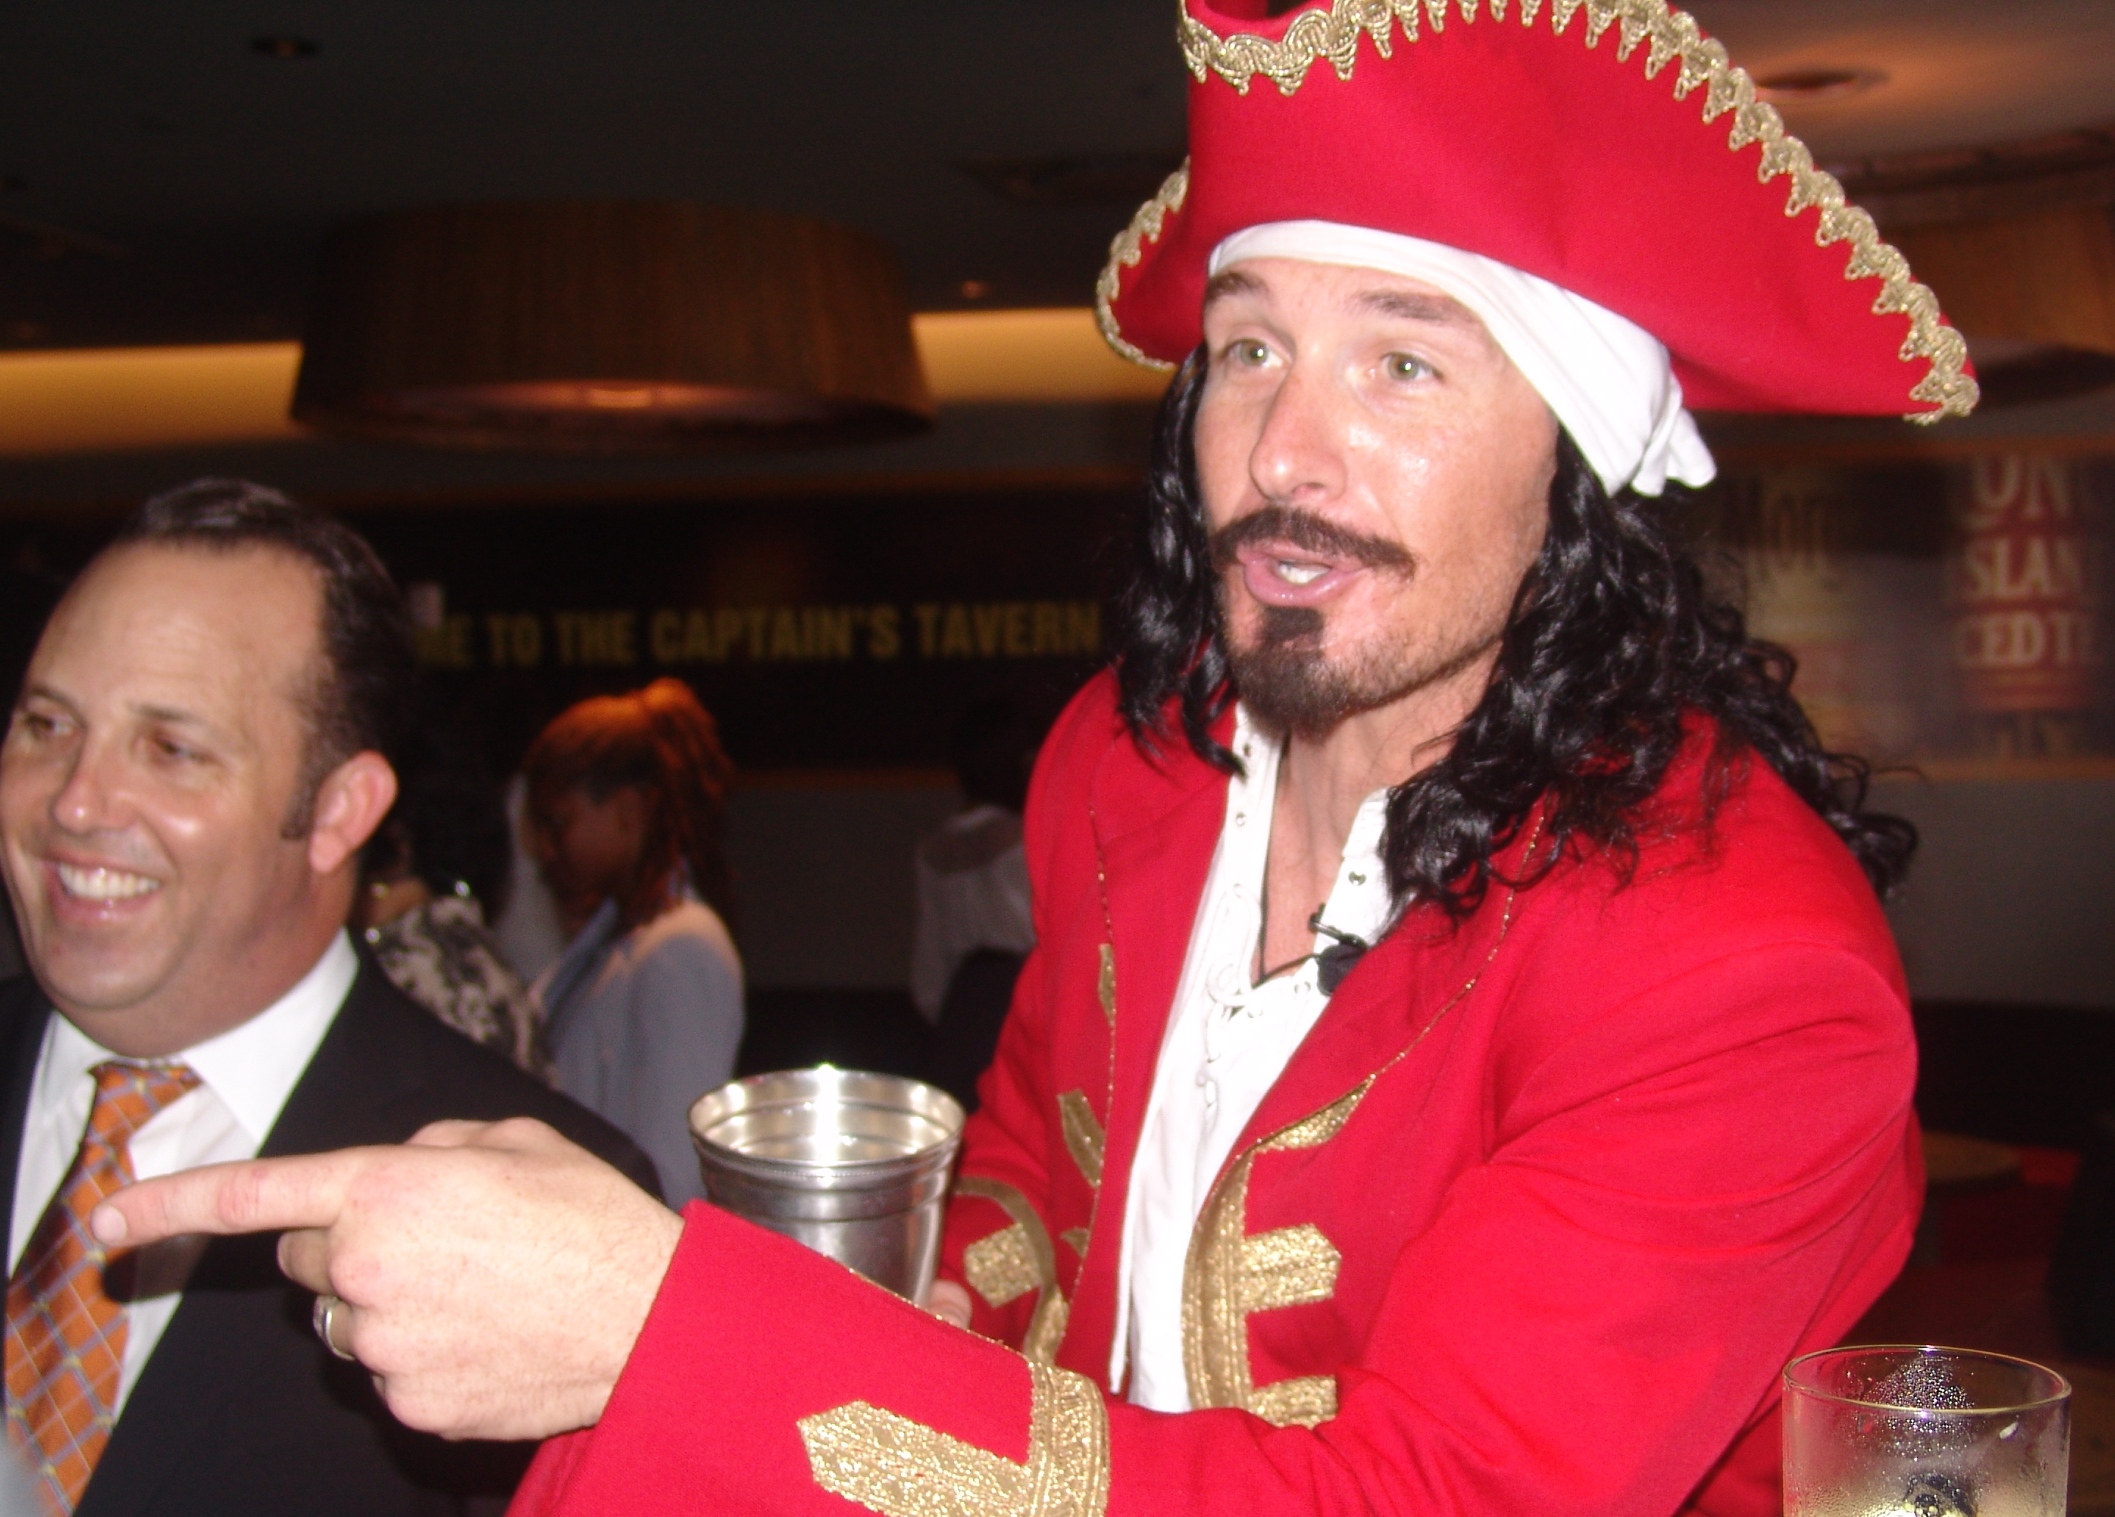 Diageo's Captain Morgan character was part of the festivities.